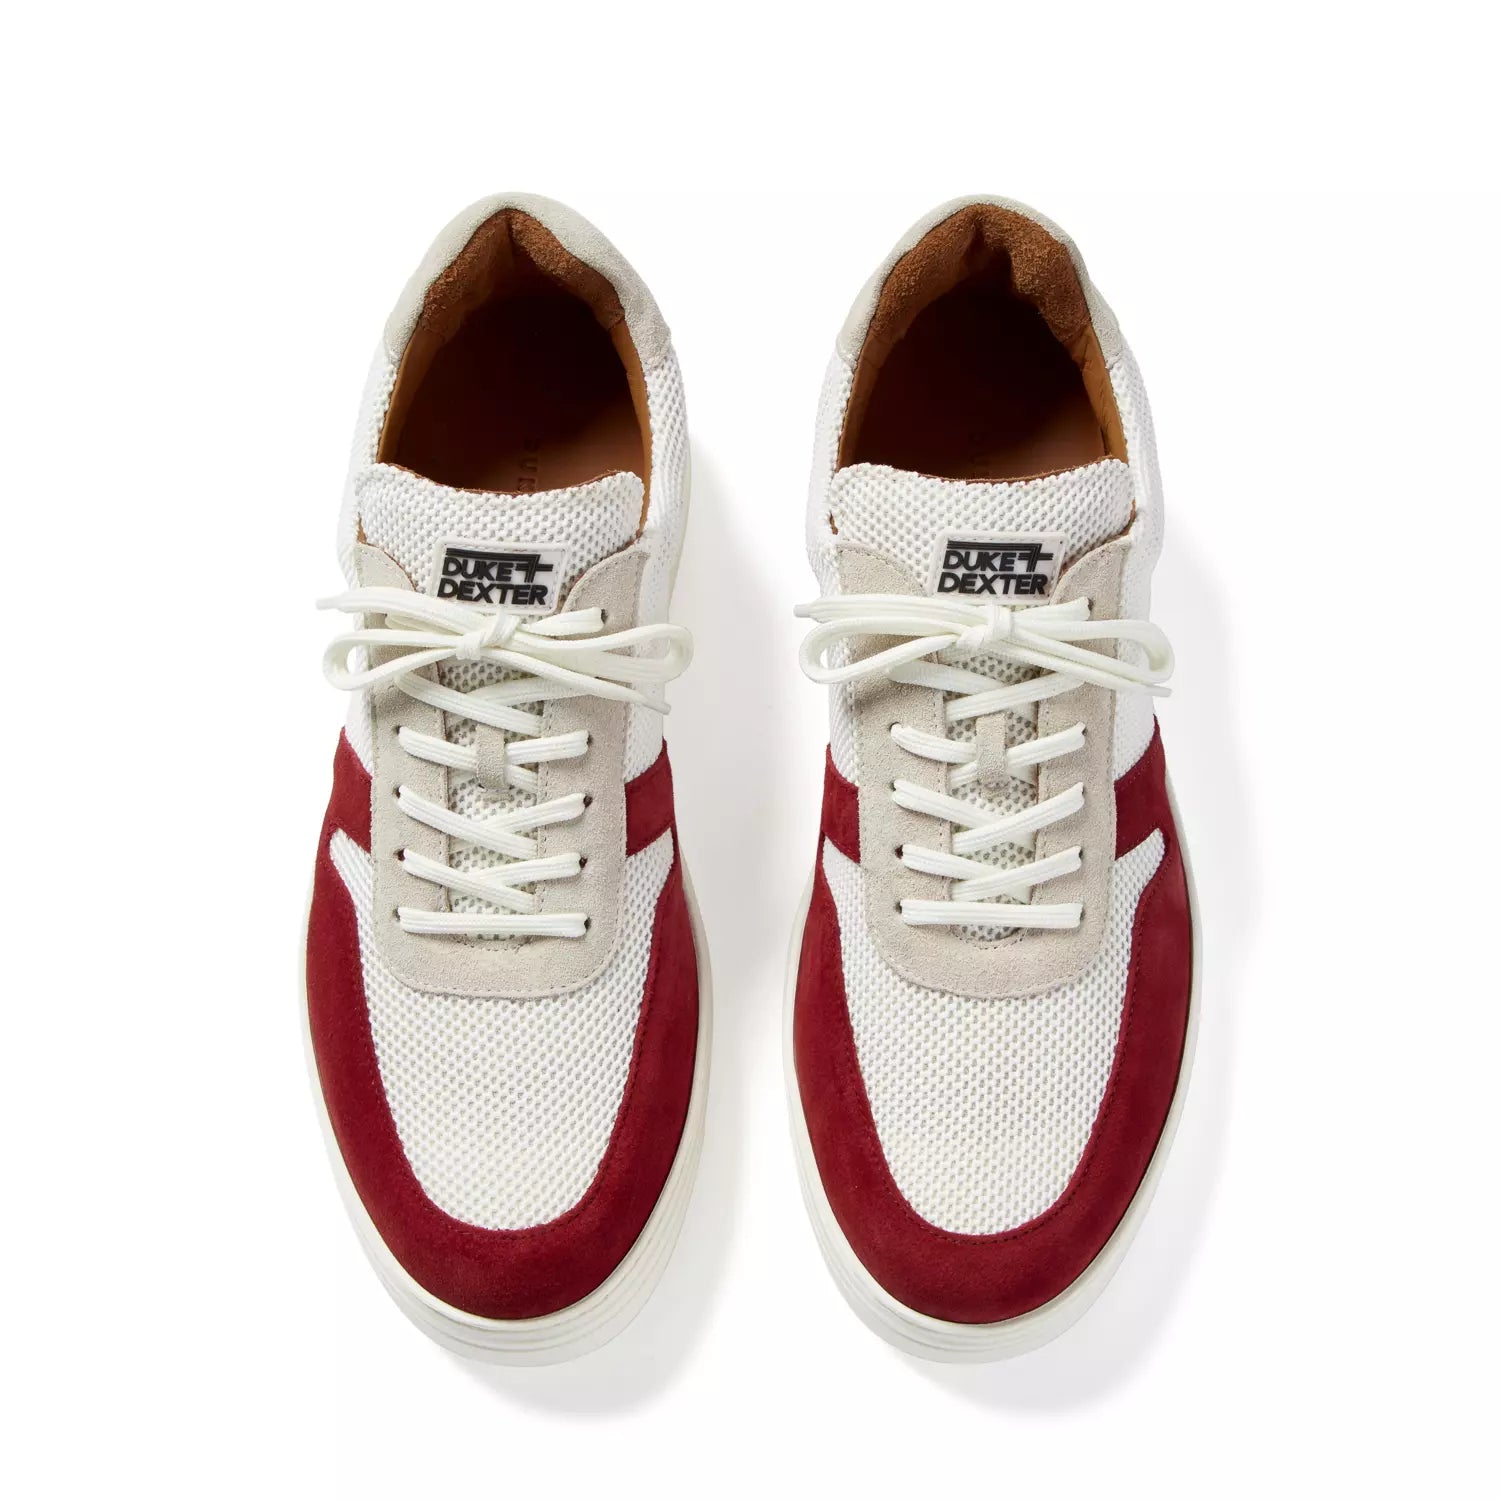 Duke and Dexter Ritchie Rio sneakers for men extra light comfortable White and Burgundy